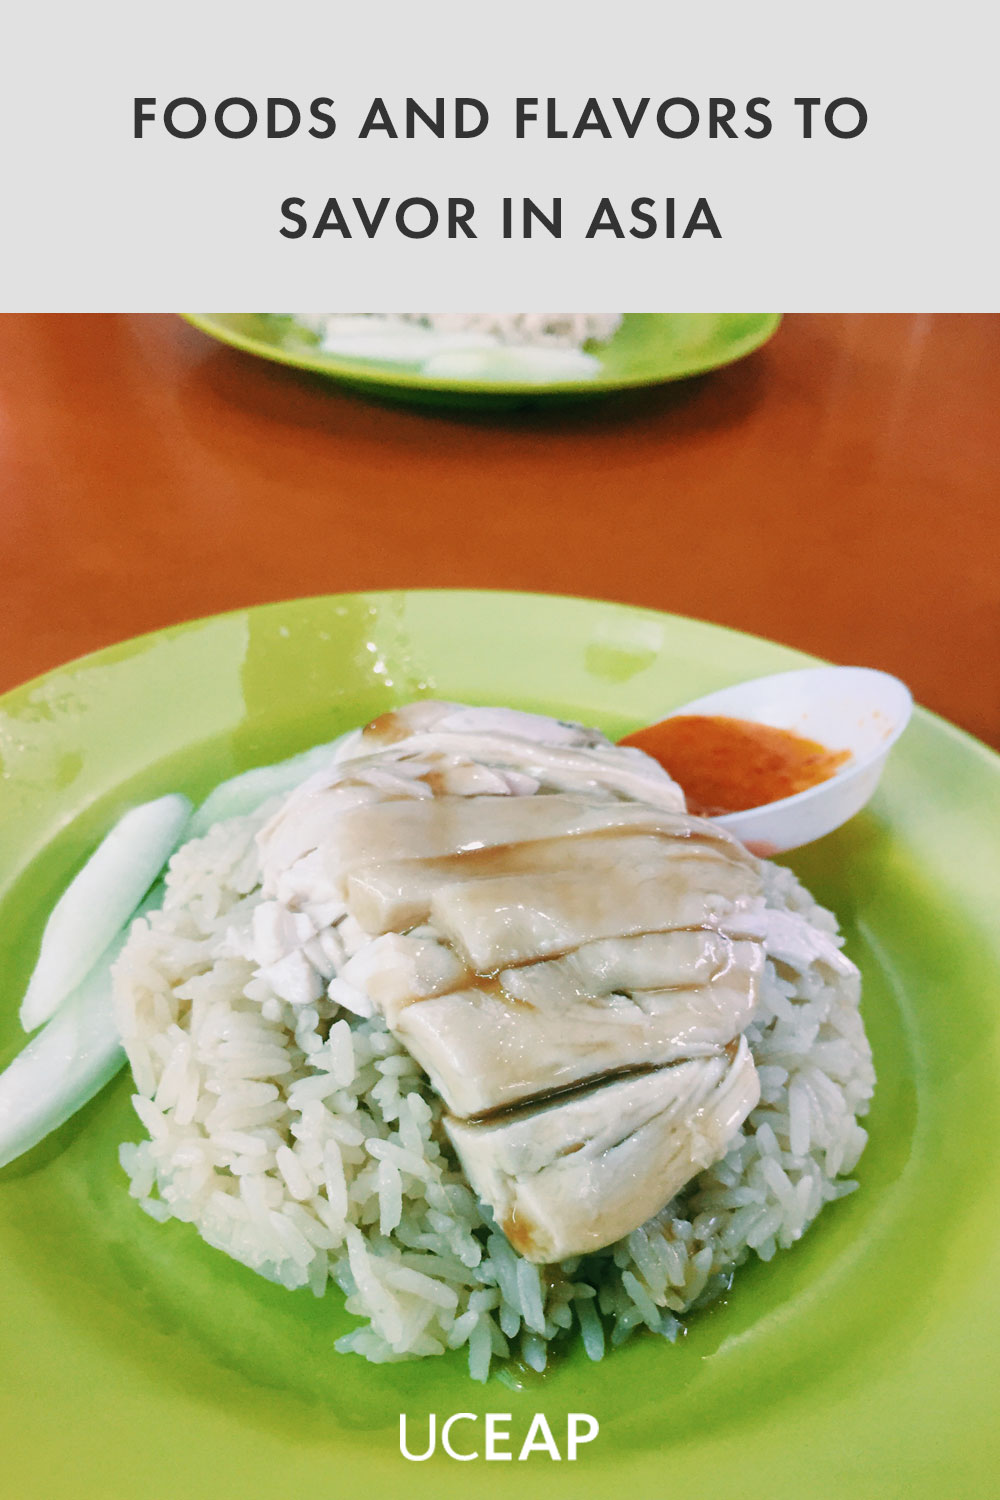 Chicken and rice on a green plate